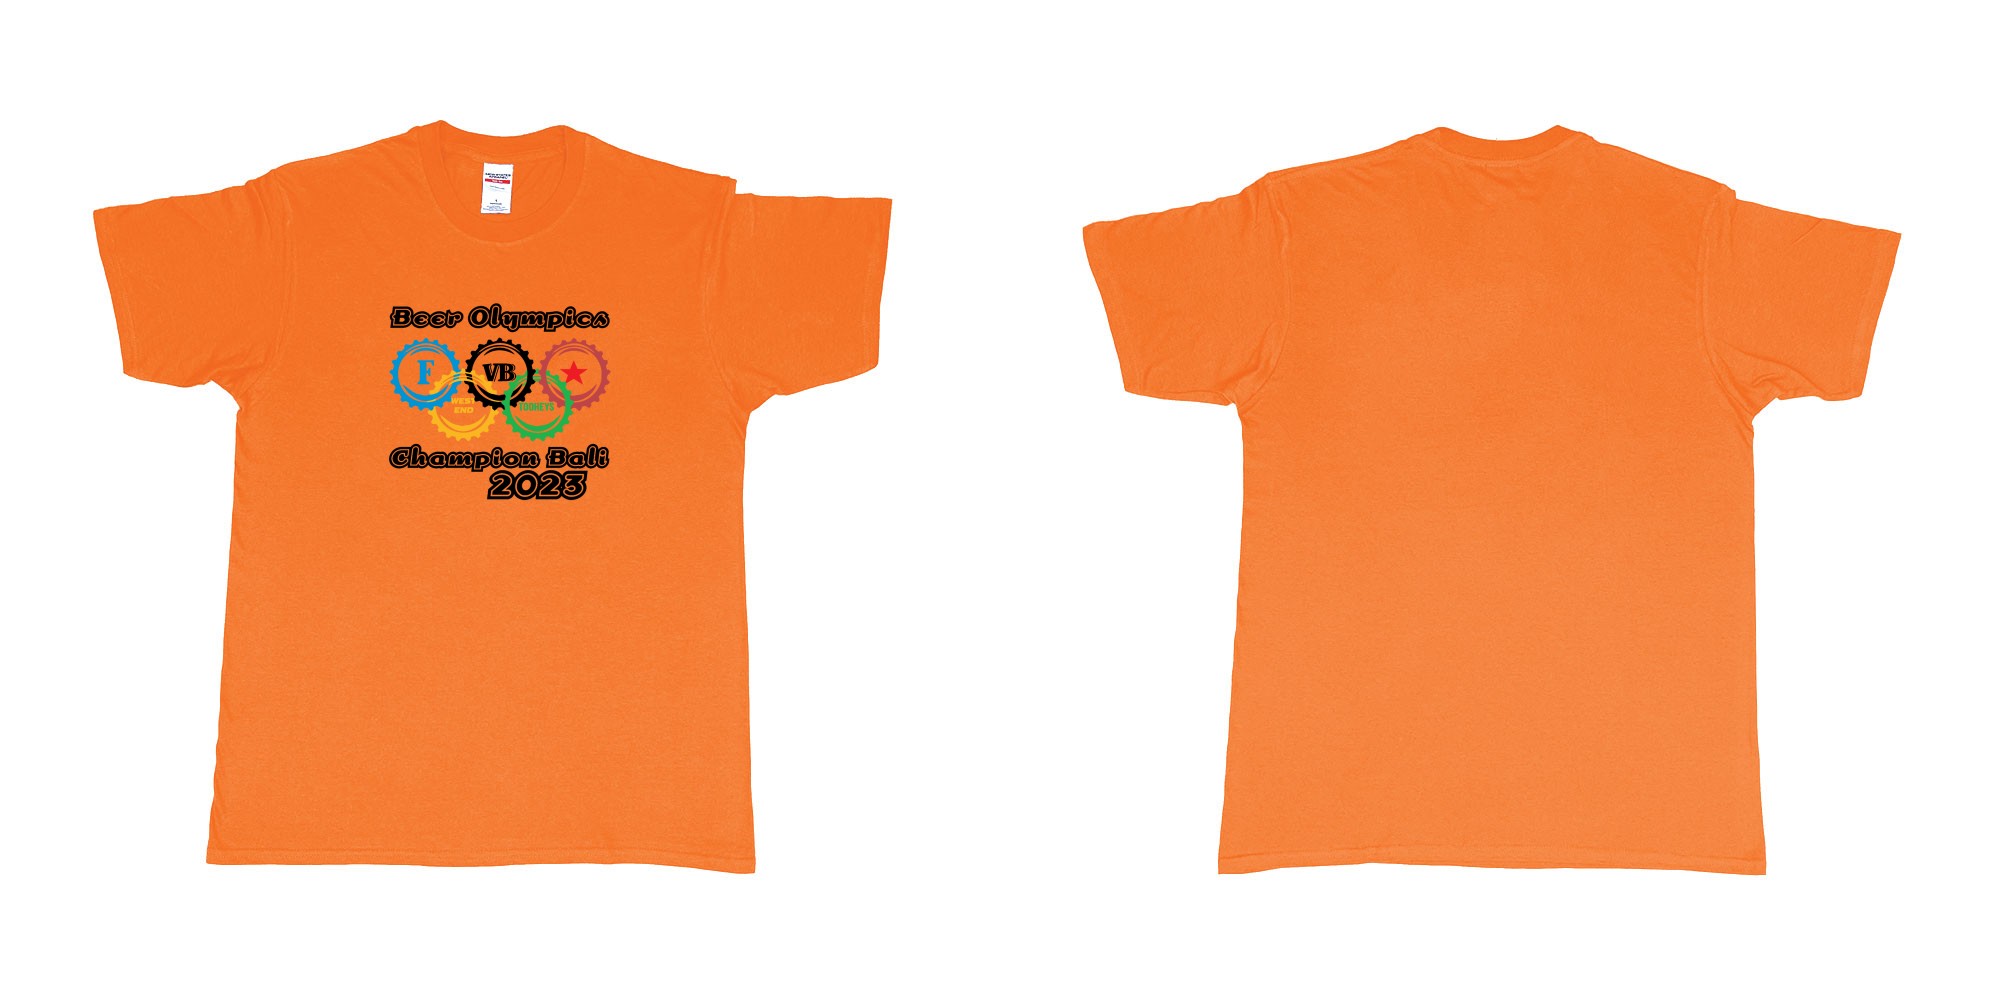 Custom tshirt design Beer Olympics Champion Bali 2023 in fabric color orange choice your own text made in Bali by The Pirate Way